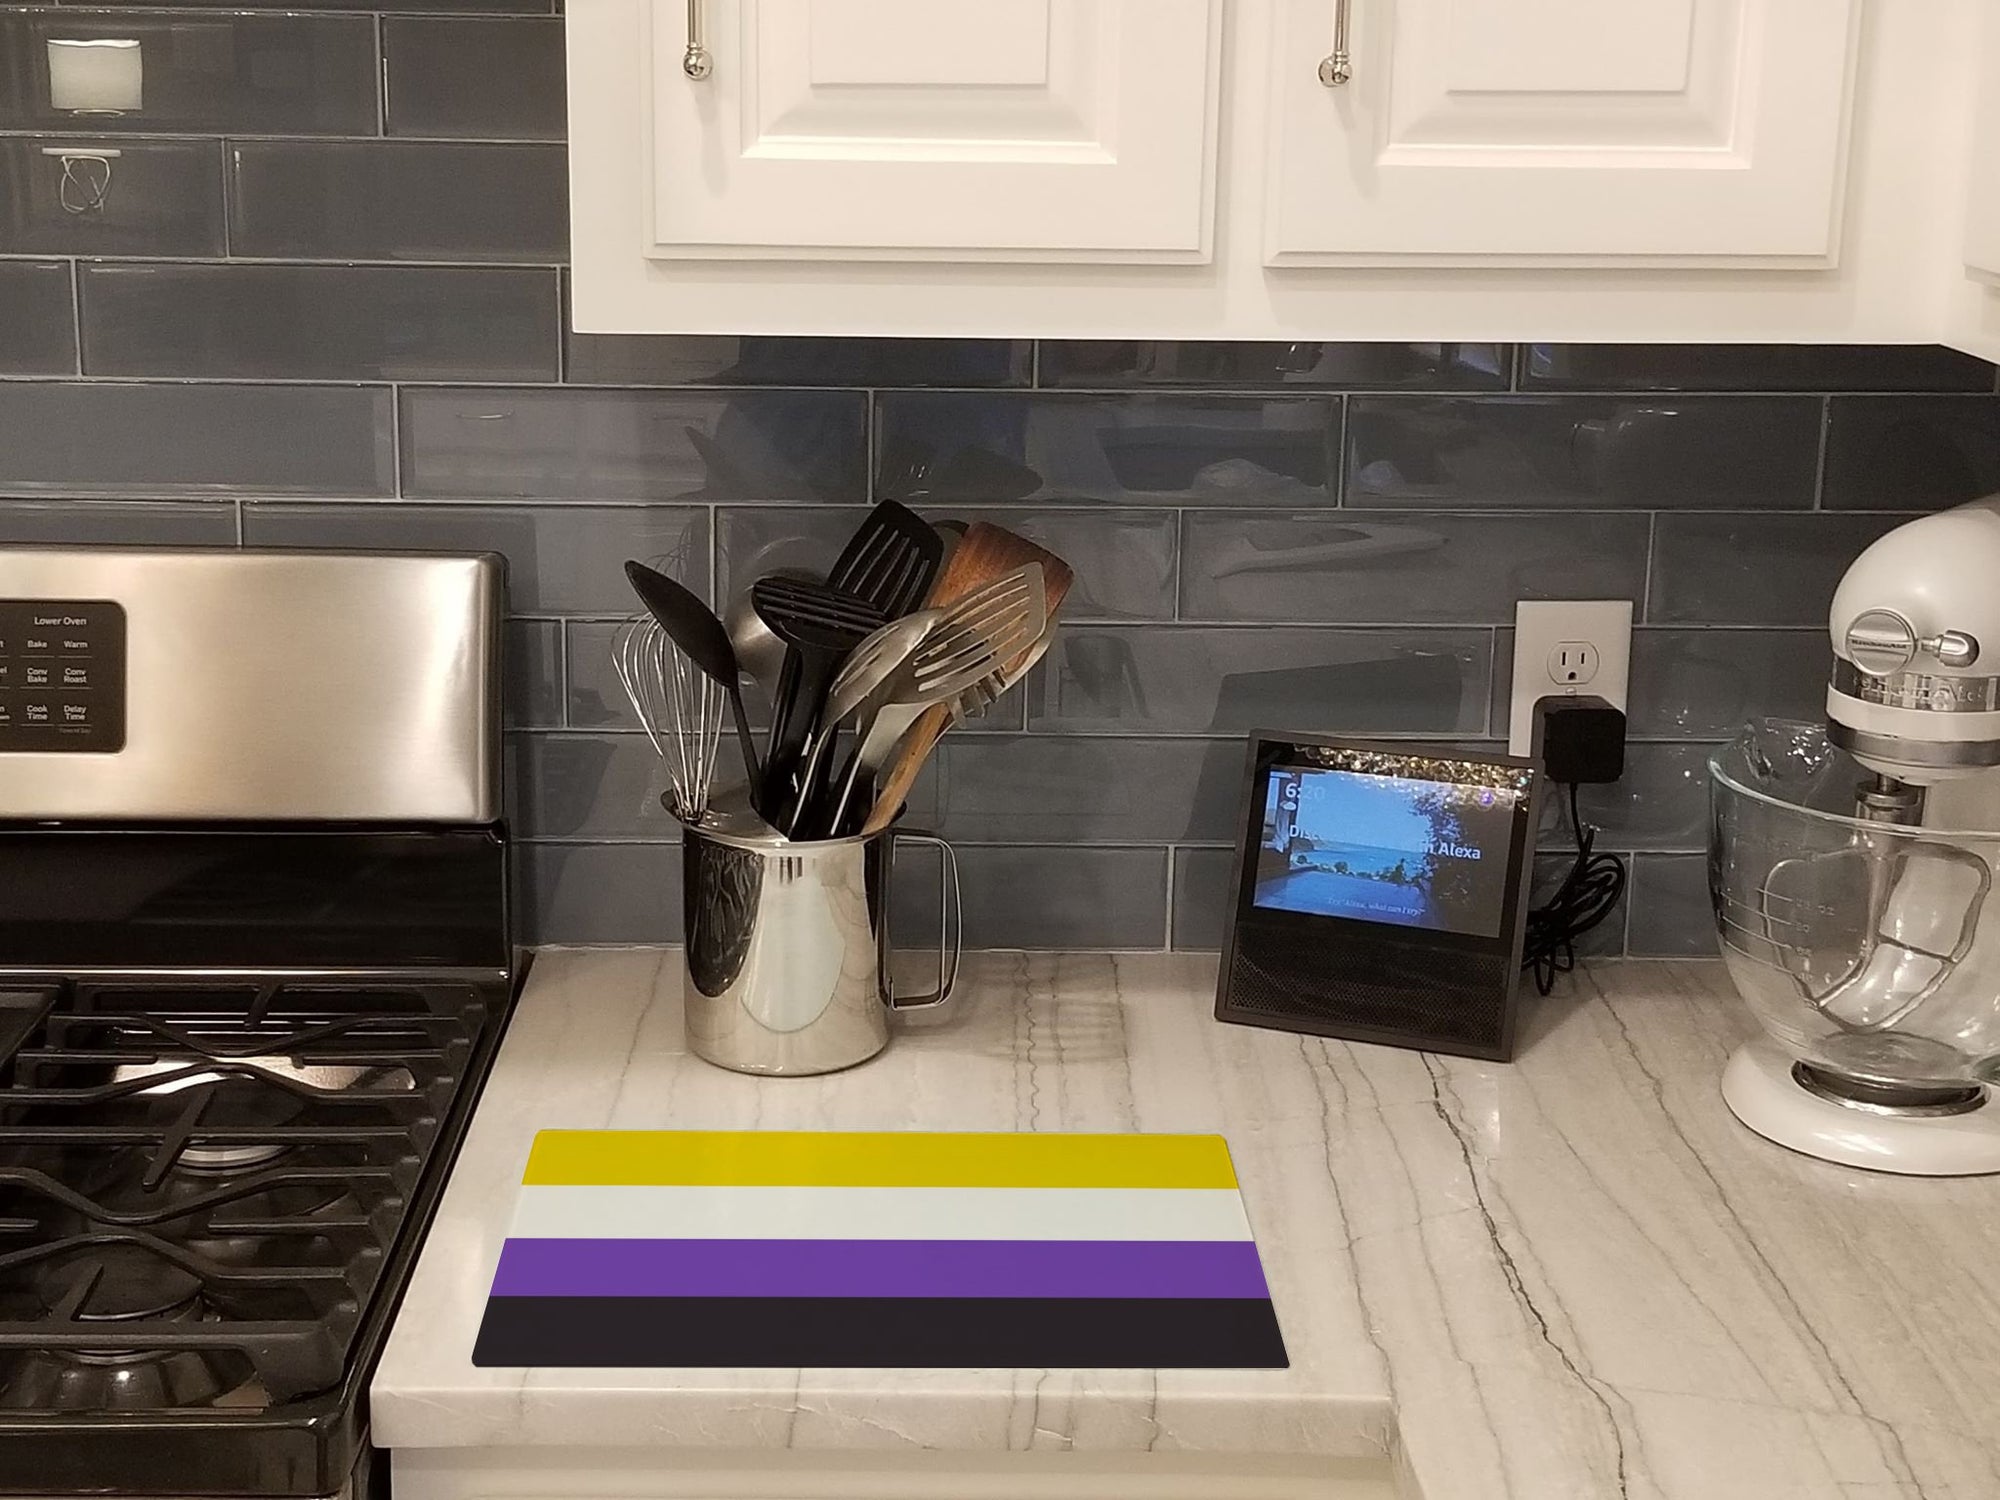 Buy this Nonbinary Pride Glass Cutting Board Large